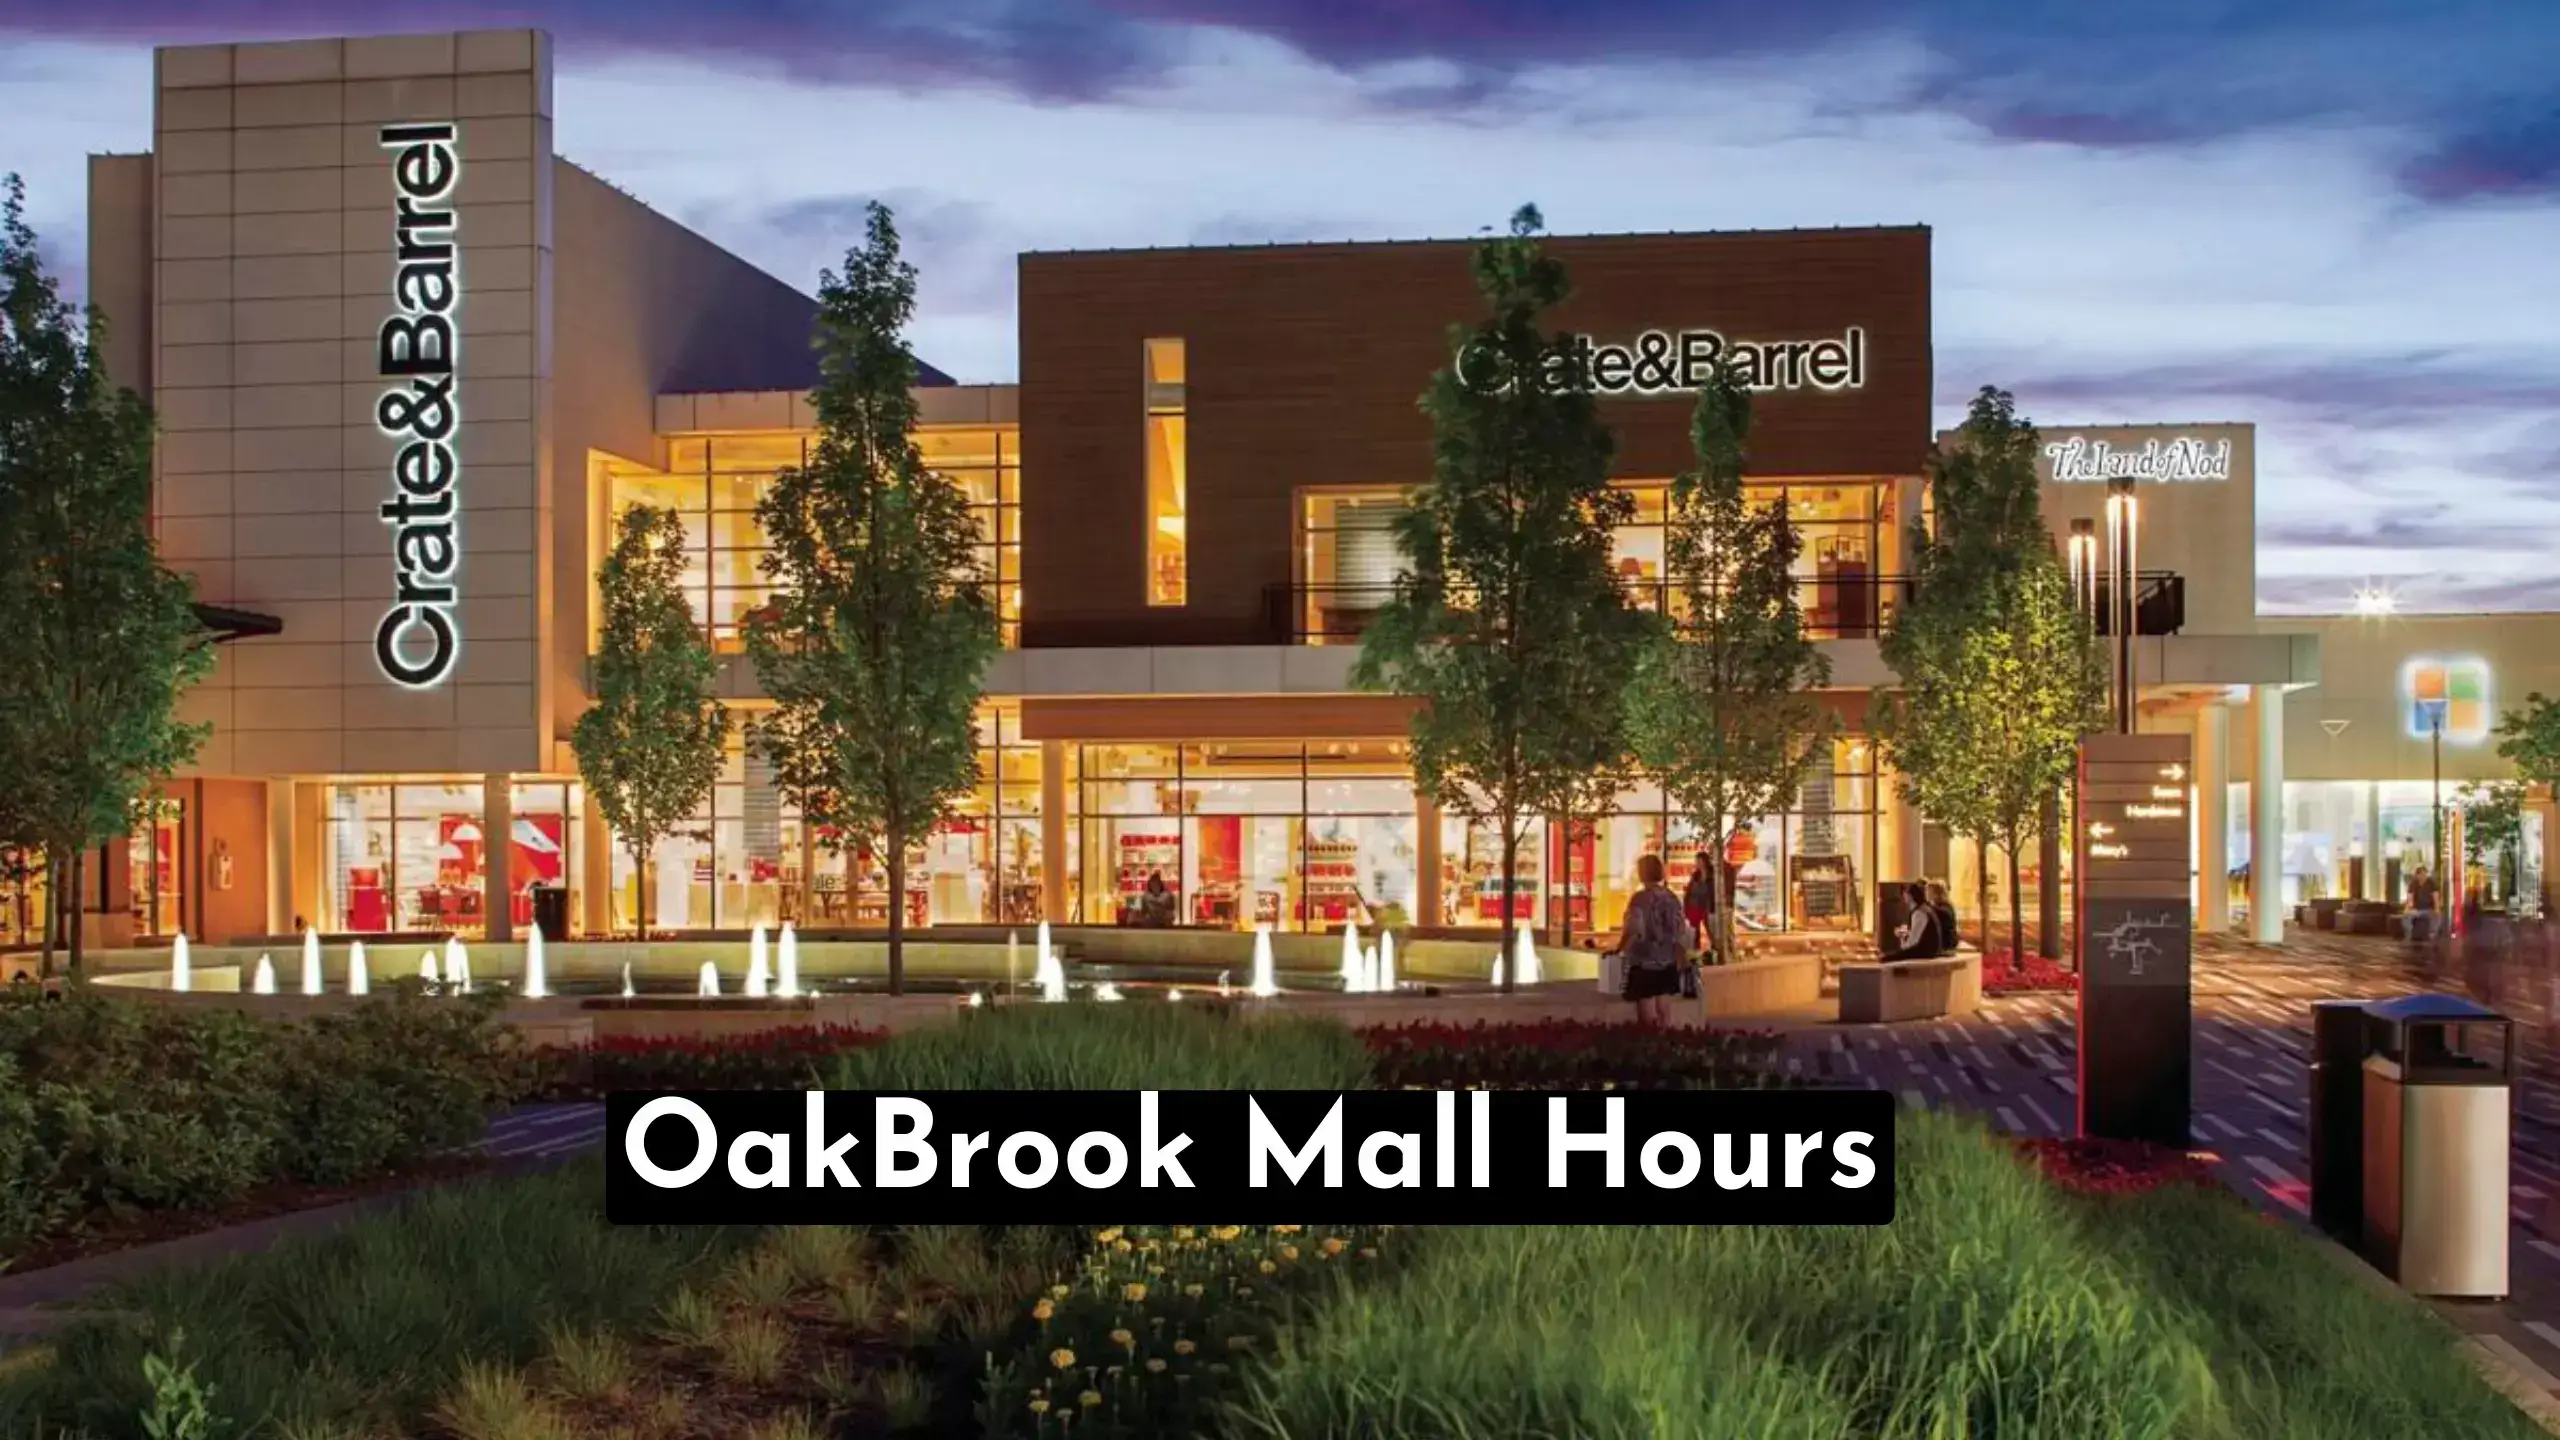 OakBrook Mall Hours: Find Perfect Times for Hassle Free Trip